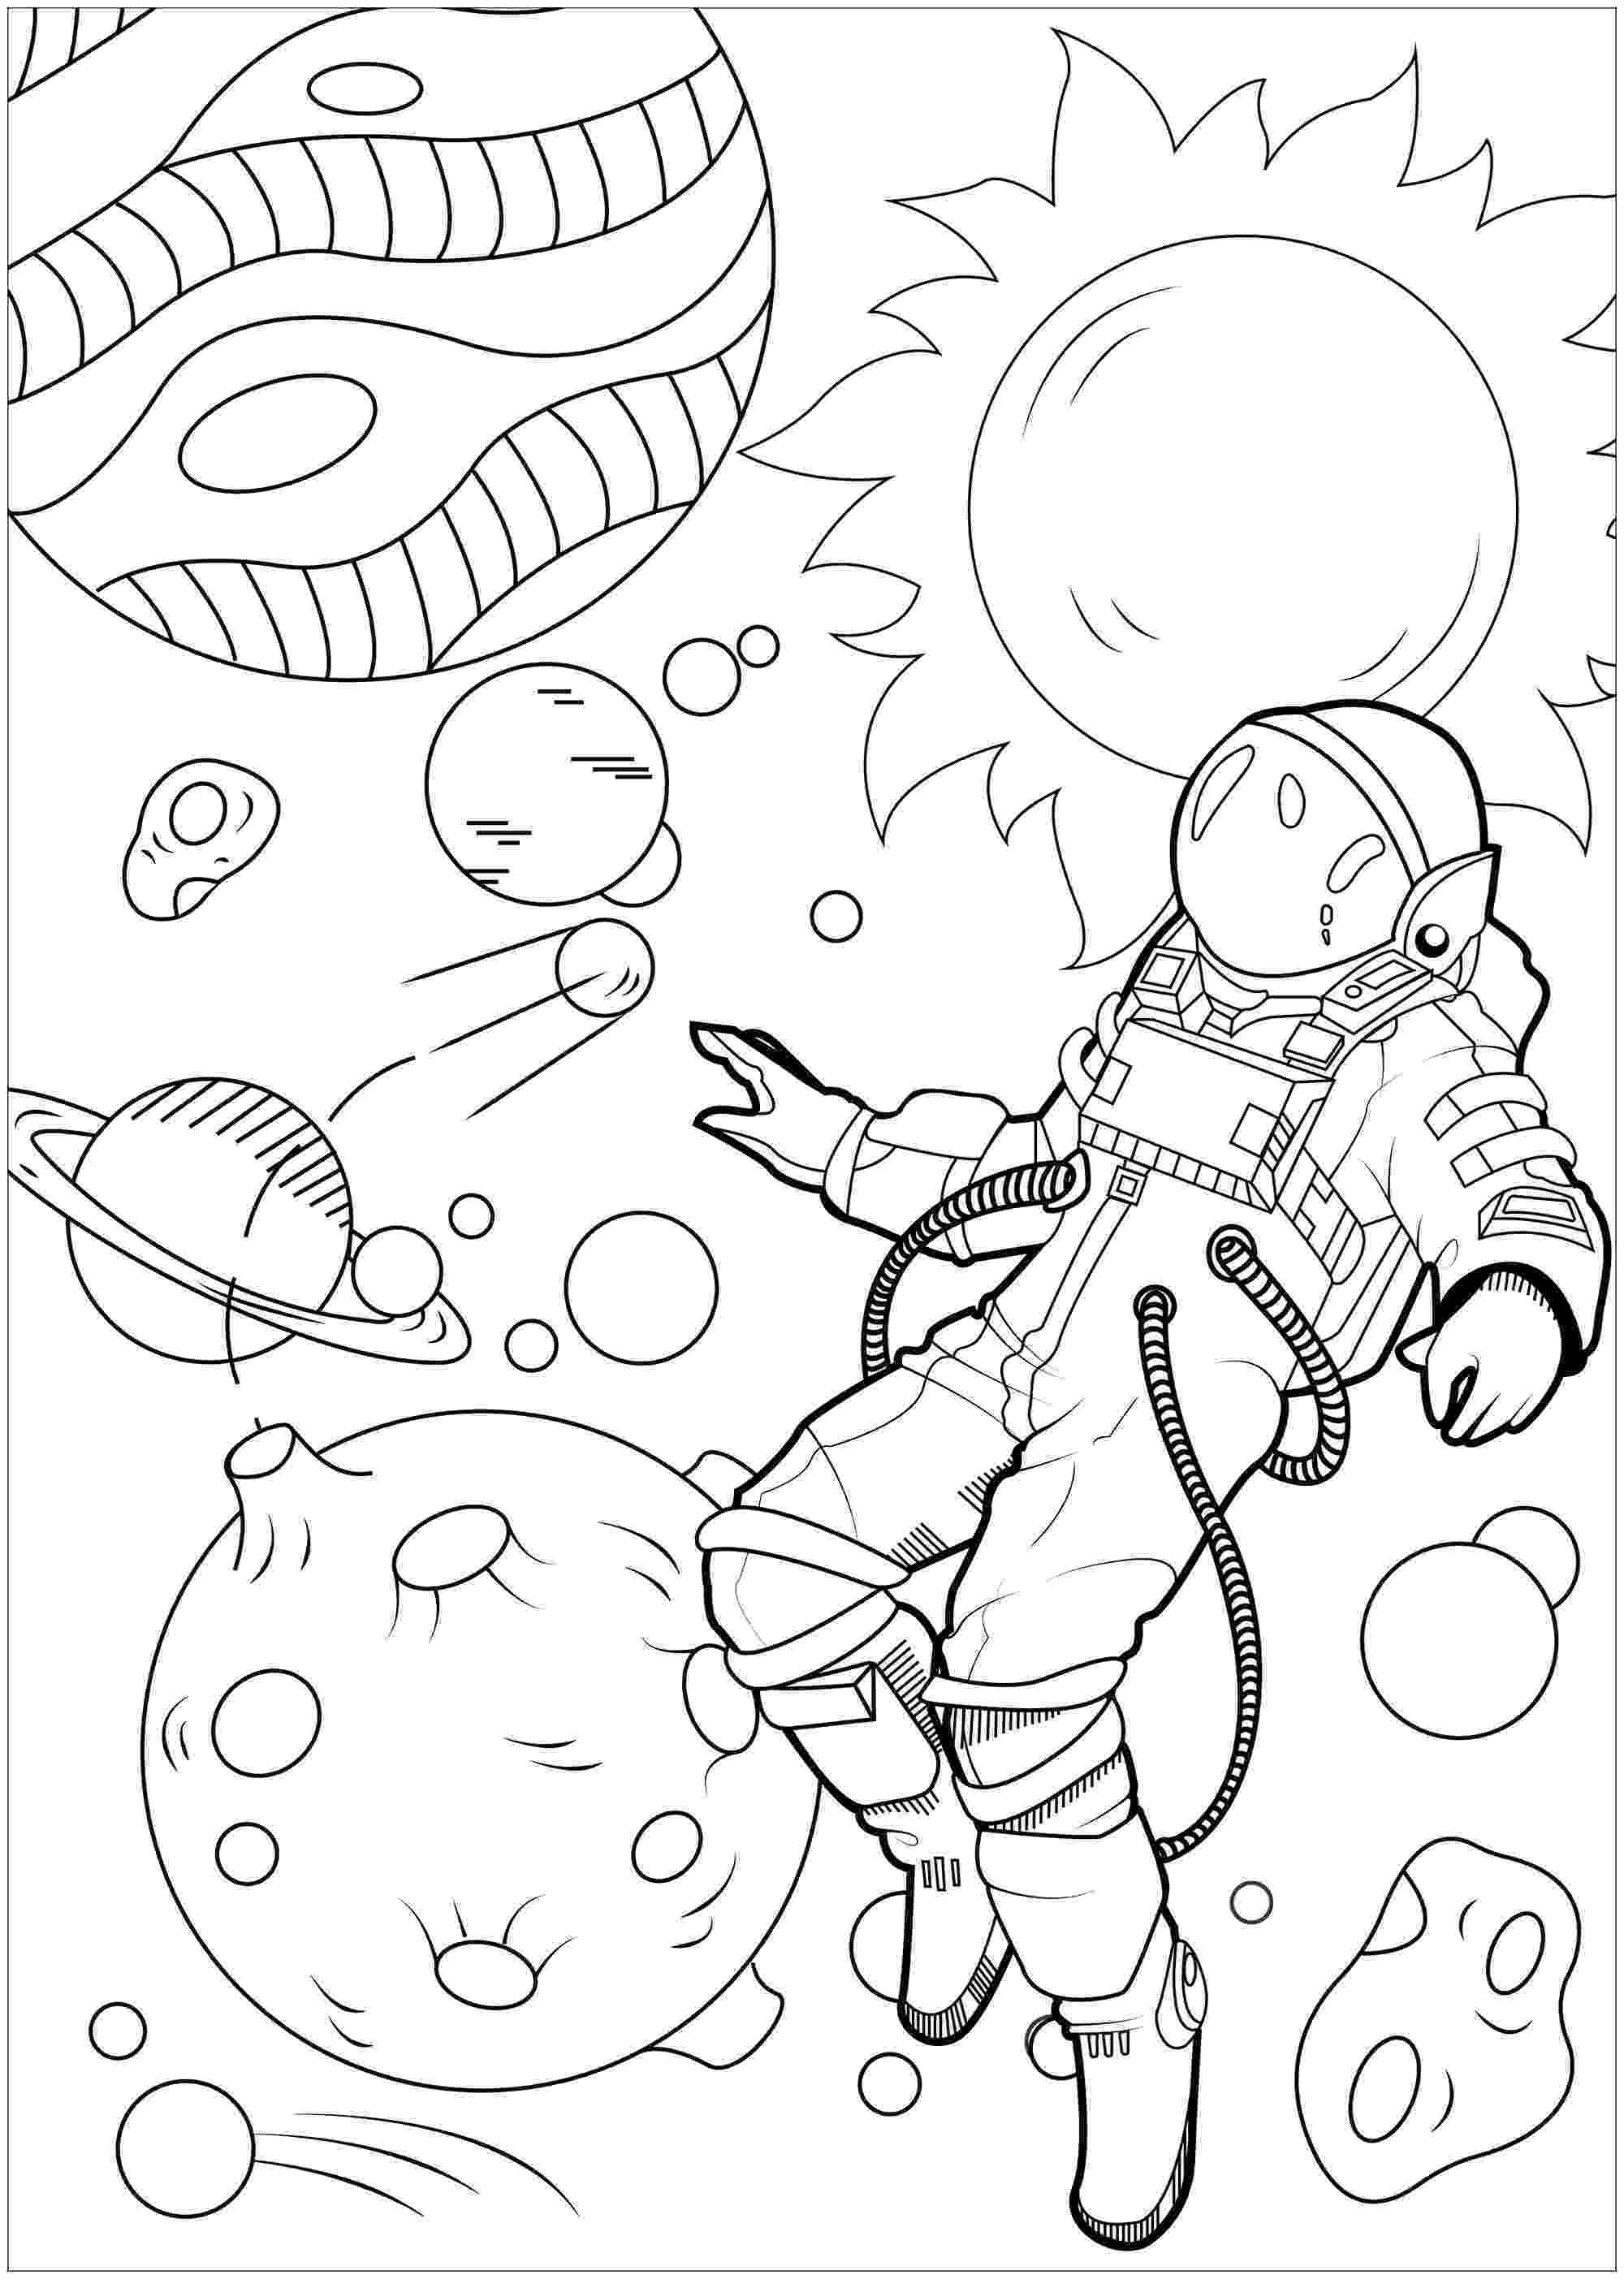 coloring pages of astronauts astronaut coloring page space coloring pages space pages of coloring astronauts 